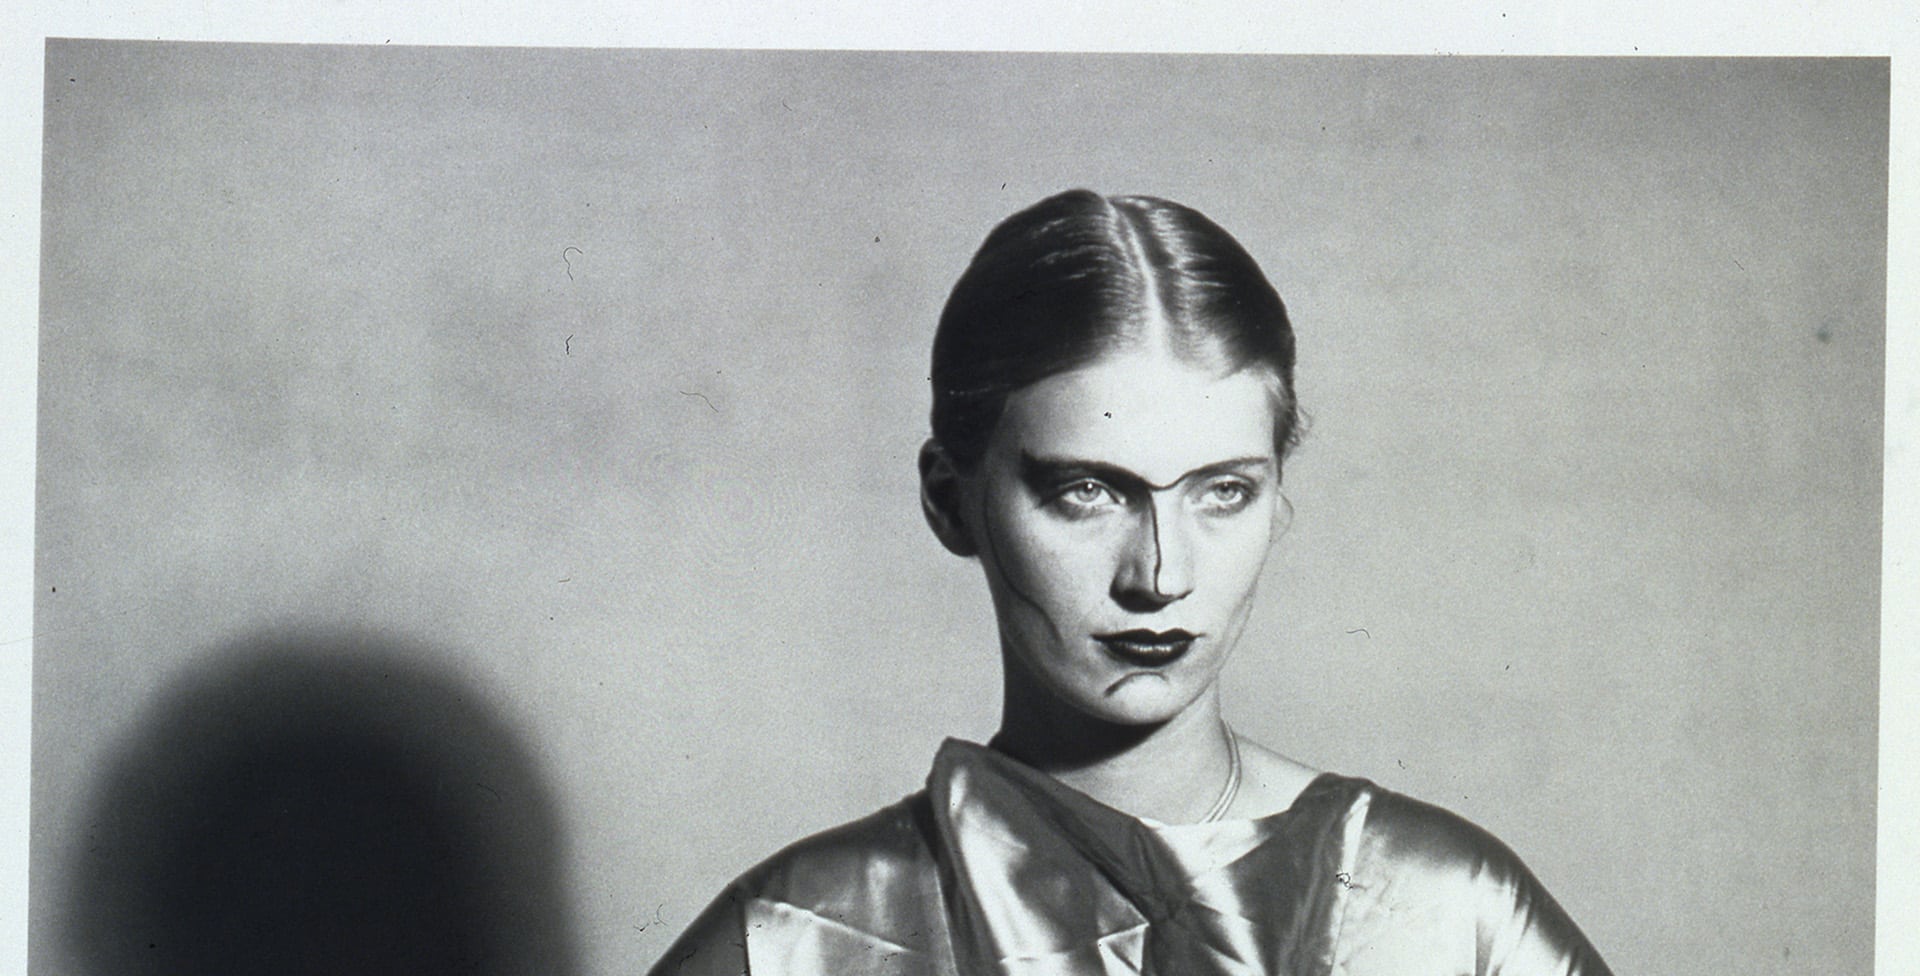 Fashion and Photography: The Man Ray Revolution